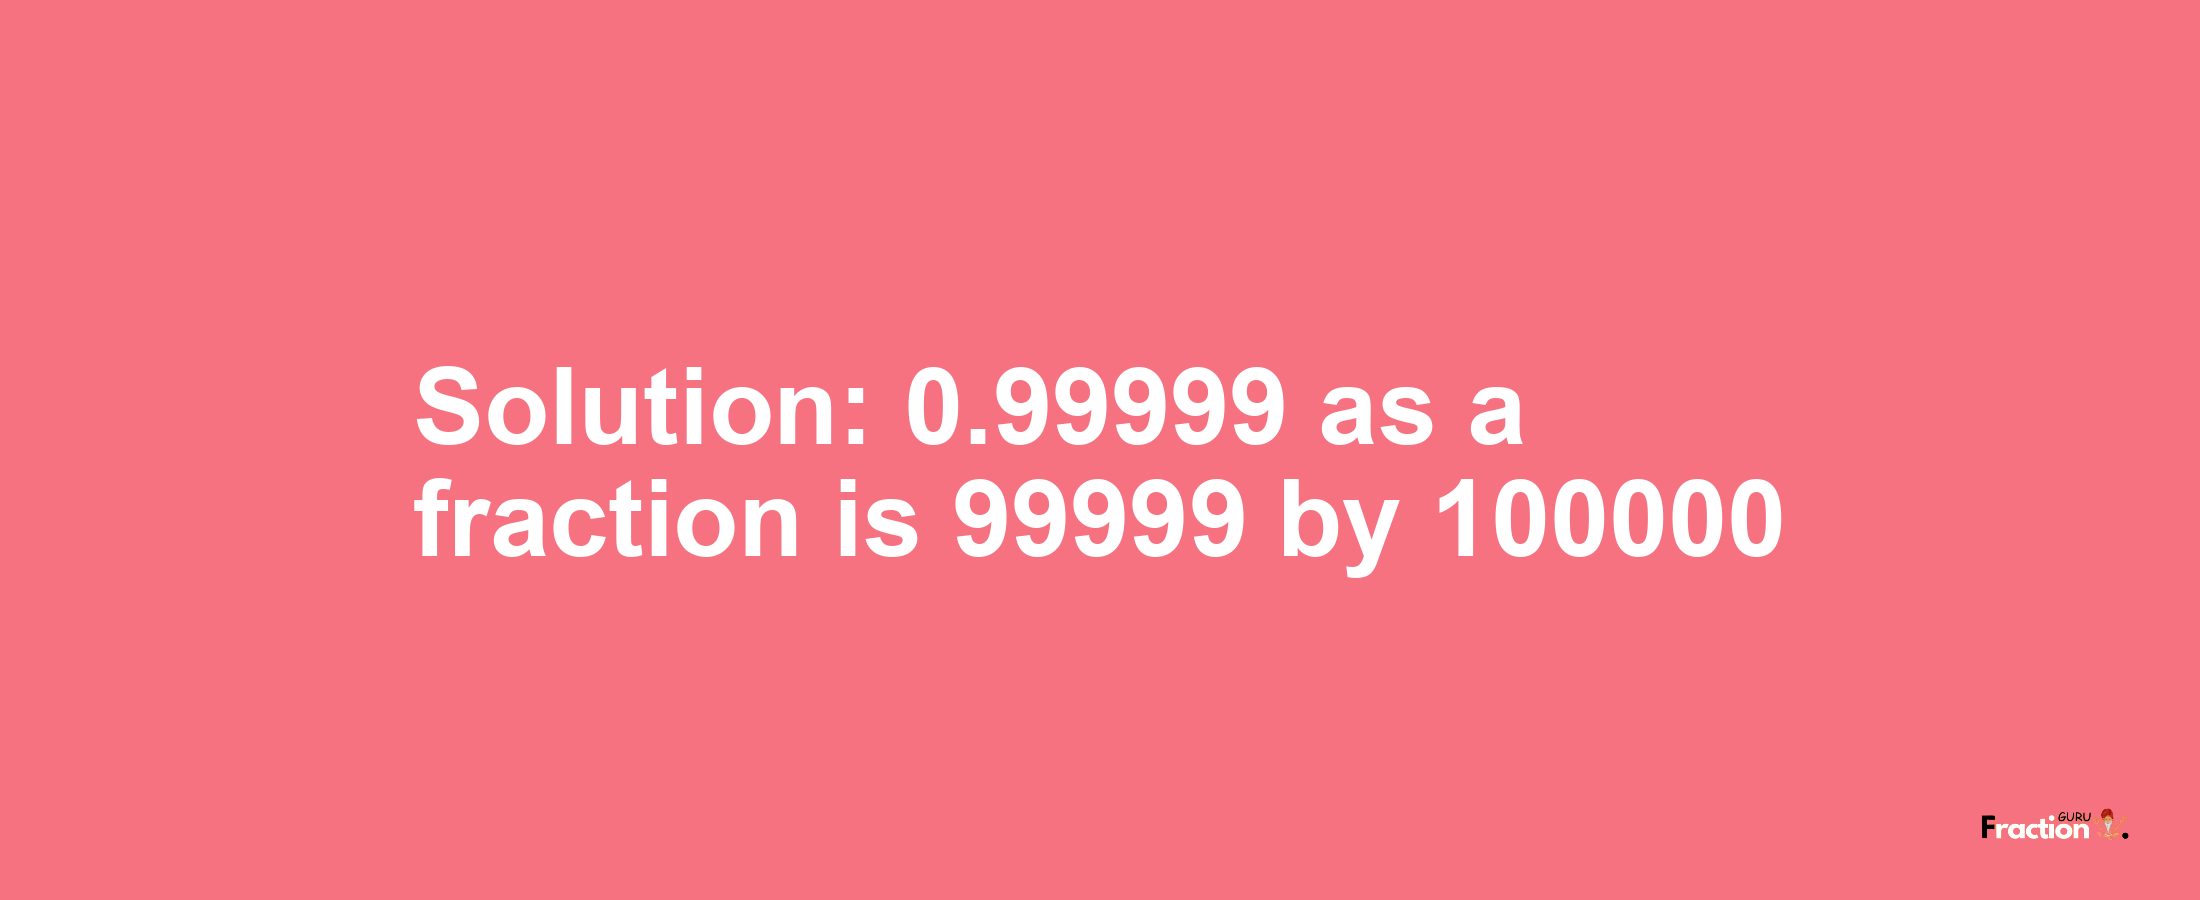 Solution:0.99999 as a fraction is 99999/100000